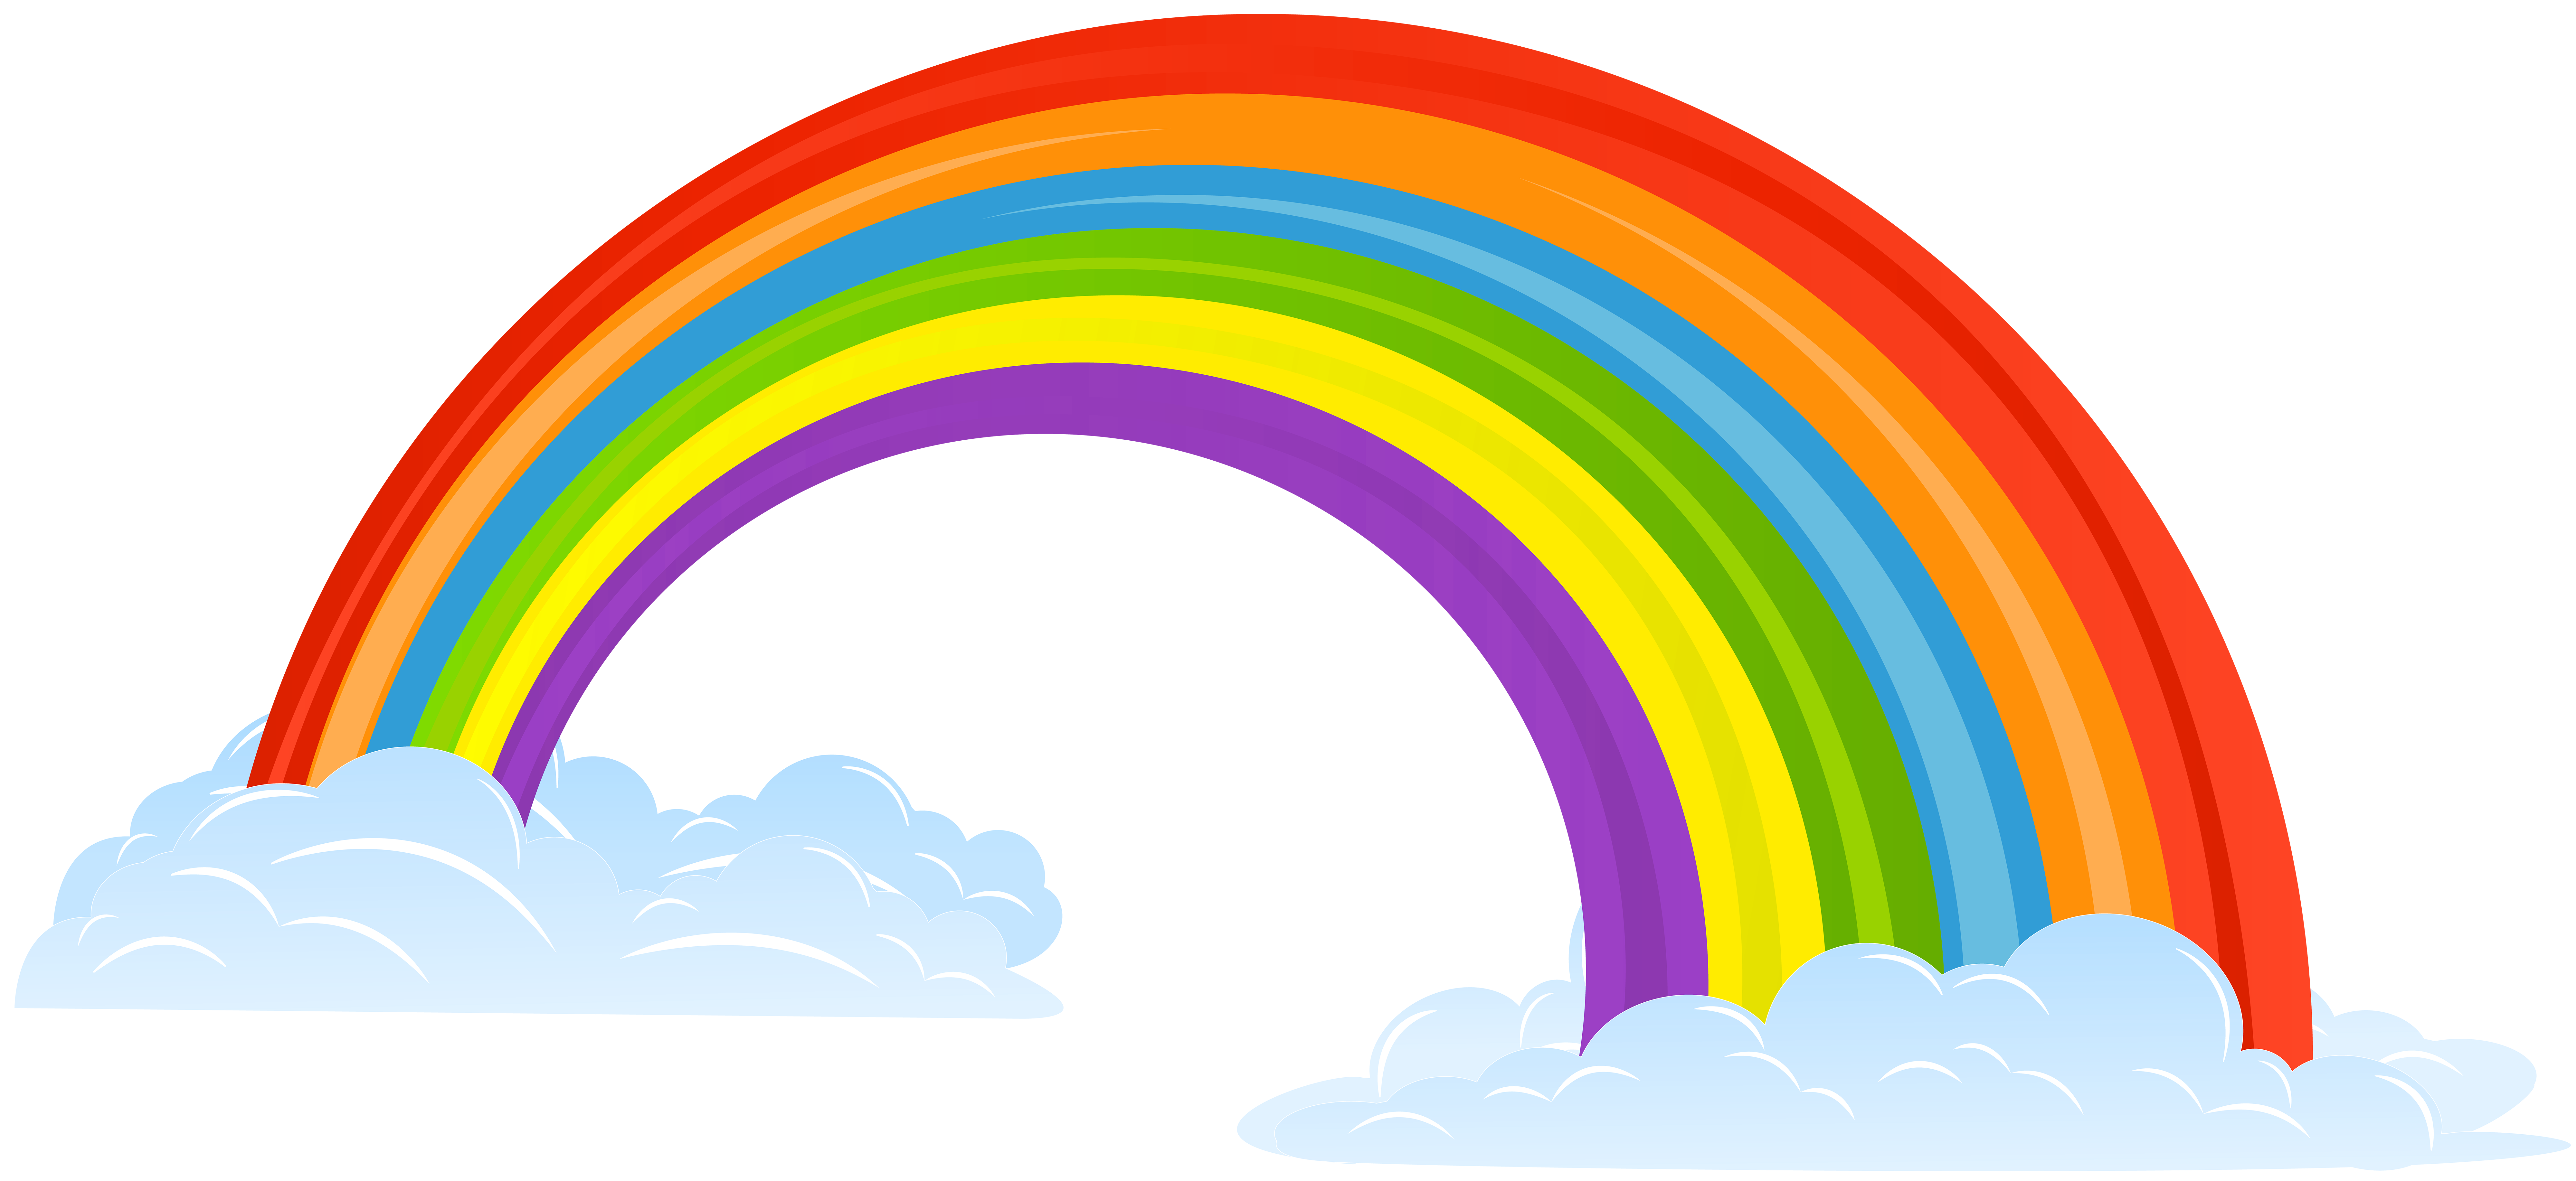 Rainbow with Clouds Clip Art Image | Gallery Yopriceville - High ...